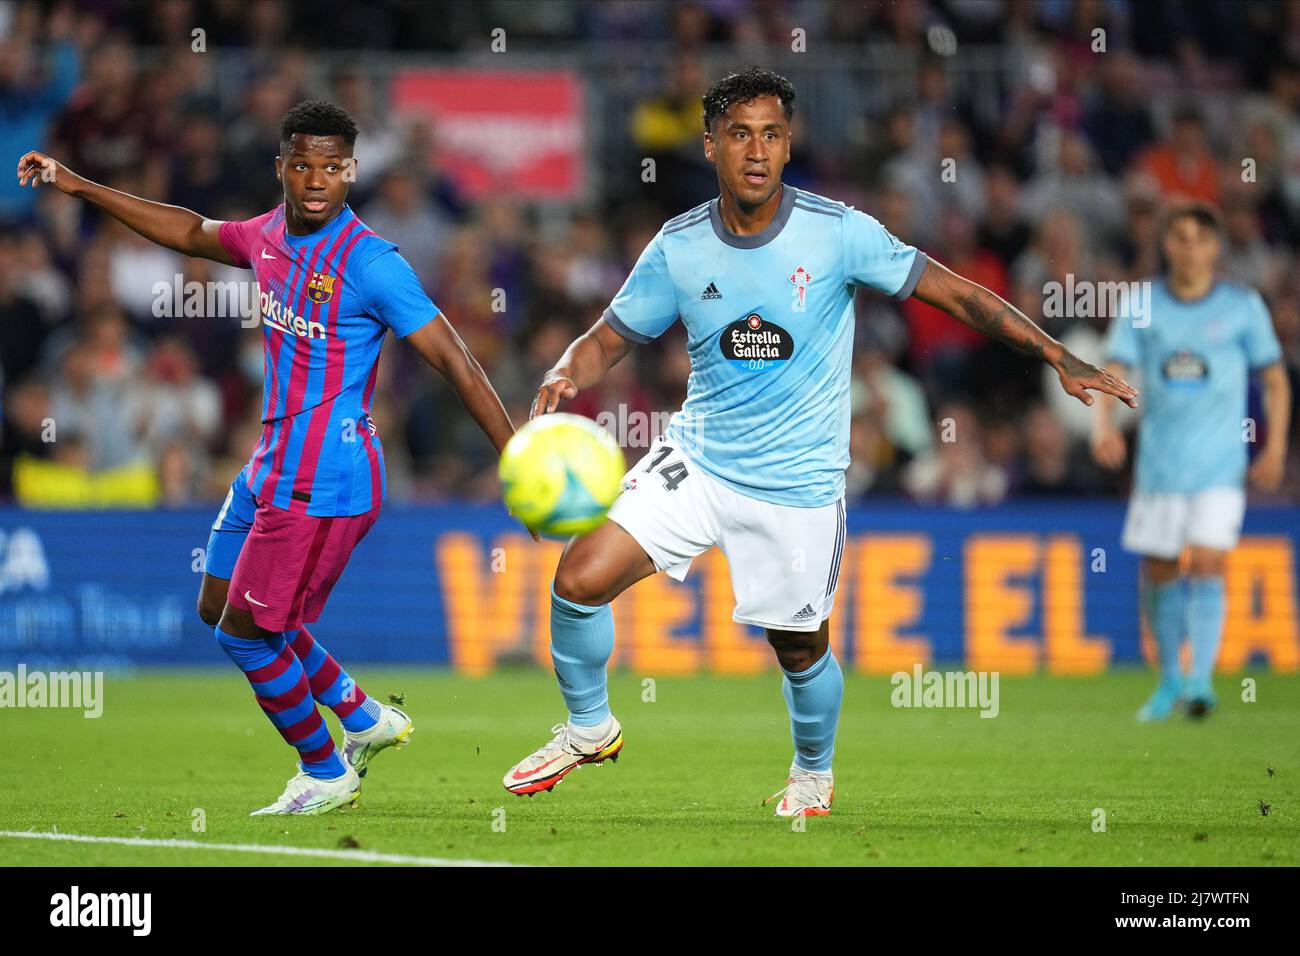 Barcelona, Spain. 10th May, 2022. Ansu Fati of FC Barcelona and Renato Tapia of RC Celta during the La Liga match between FC Barcelona and RC Celta played at Camp Nou Stadium on May 10, 2022 in Barcelona, Spain. (Photo by Sergio Ruiz/PRESSINPHOTO) Credit: PRESSINPHOTO SPORTS AGENCY/Alamy Live News Stock Photo